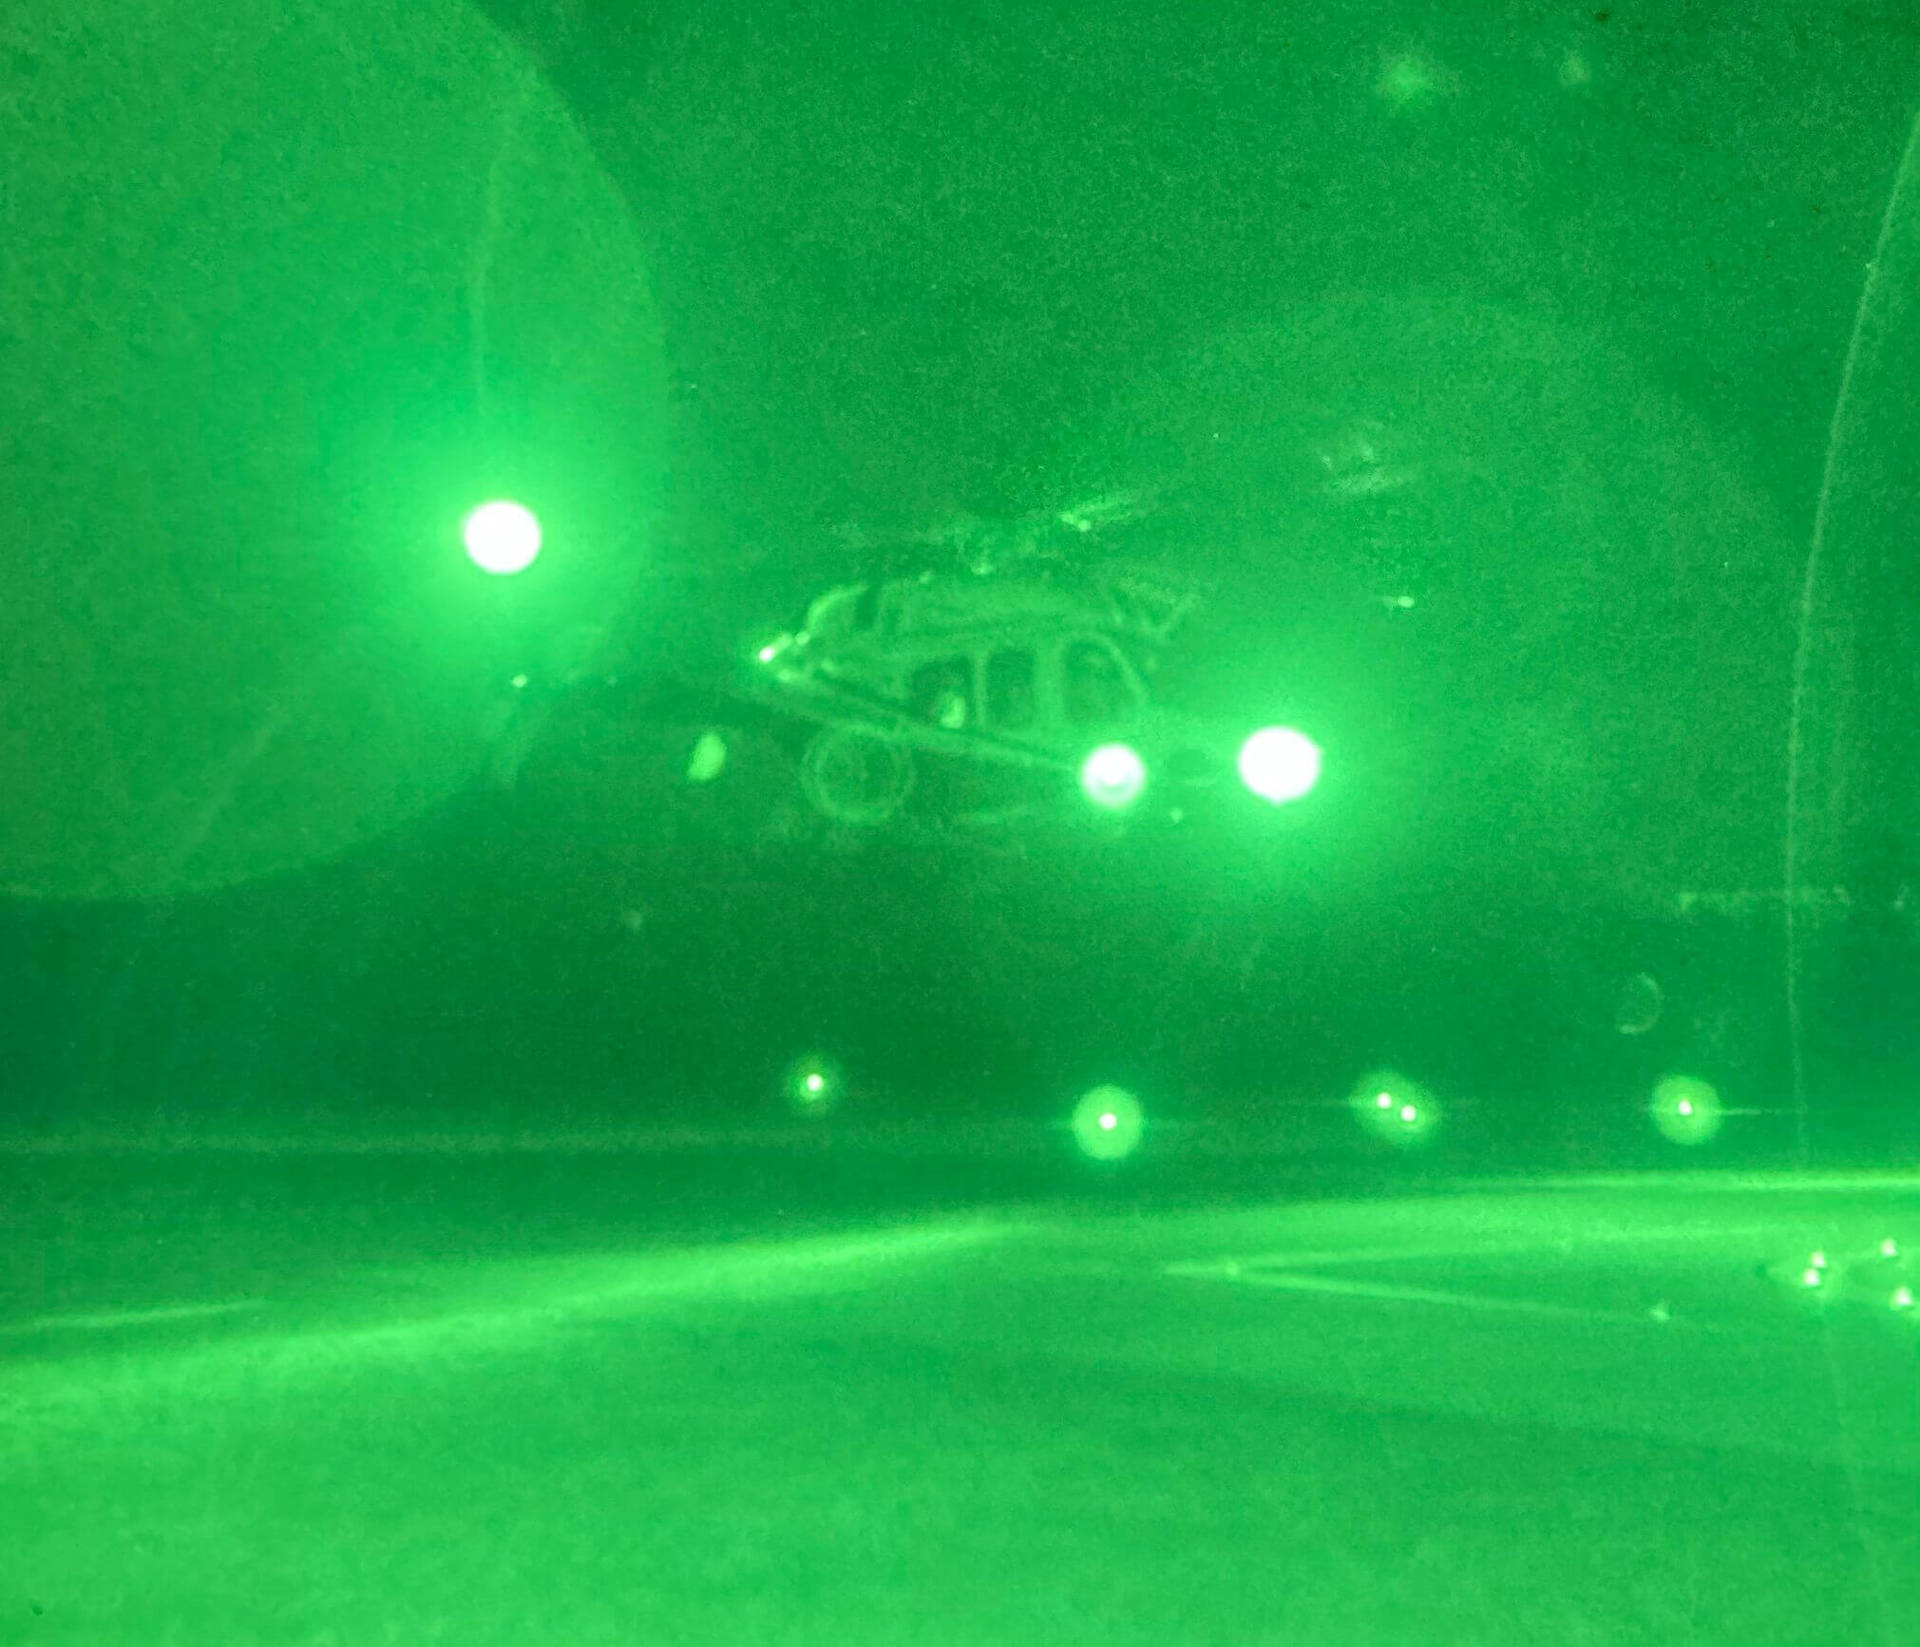 A view of the helicopter through night vision goggles.